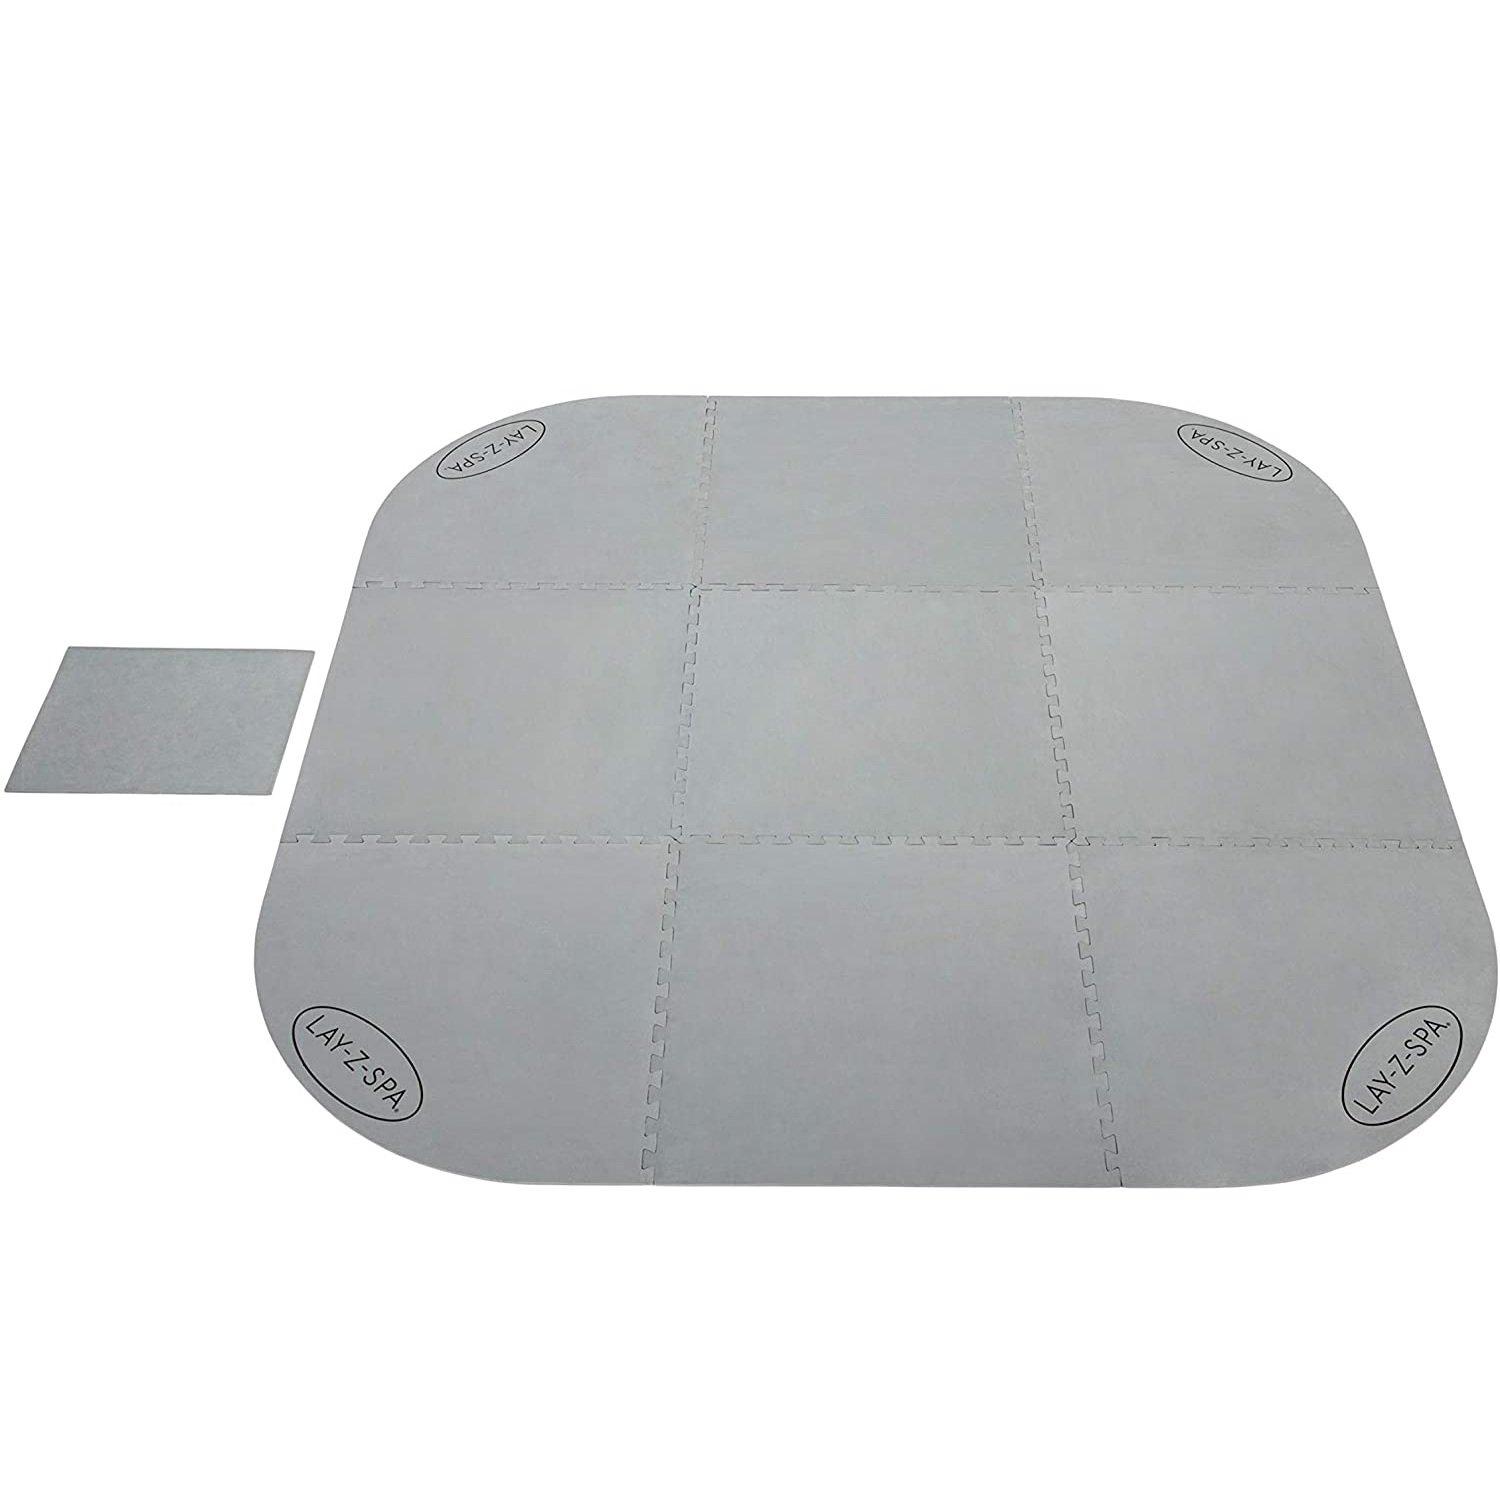 Hot Tub Square Floor Protector